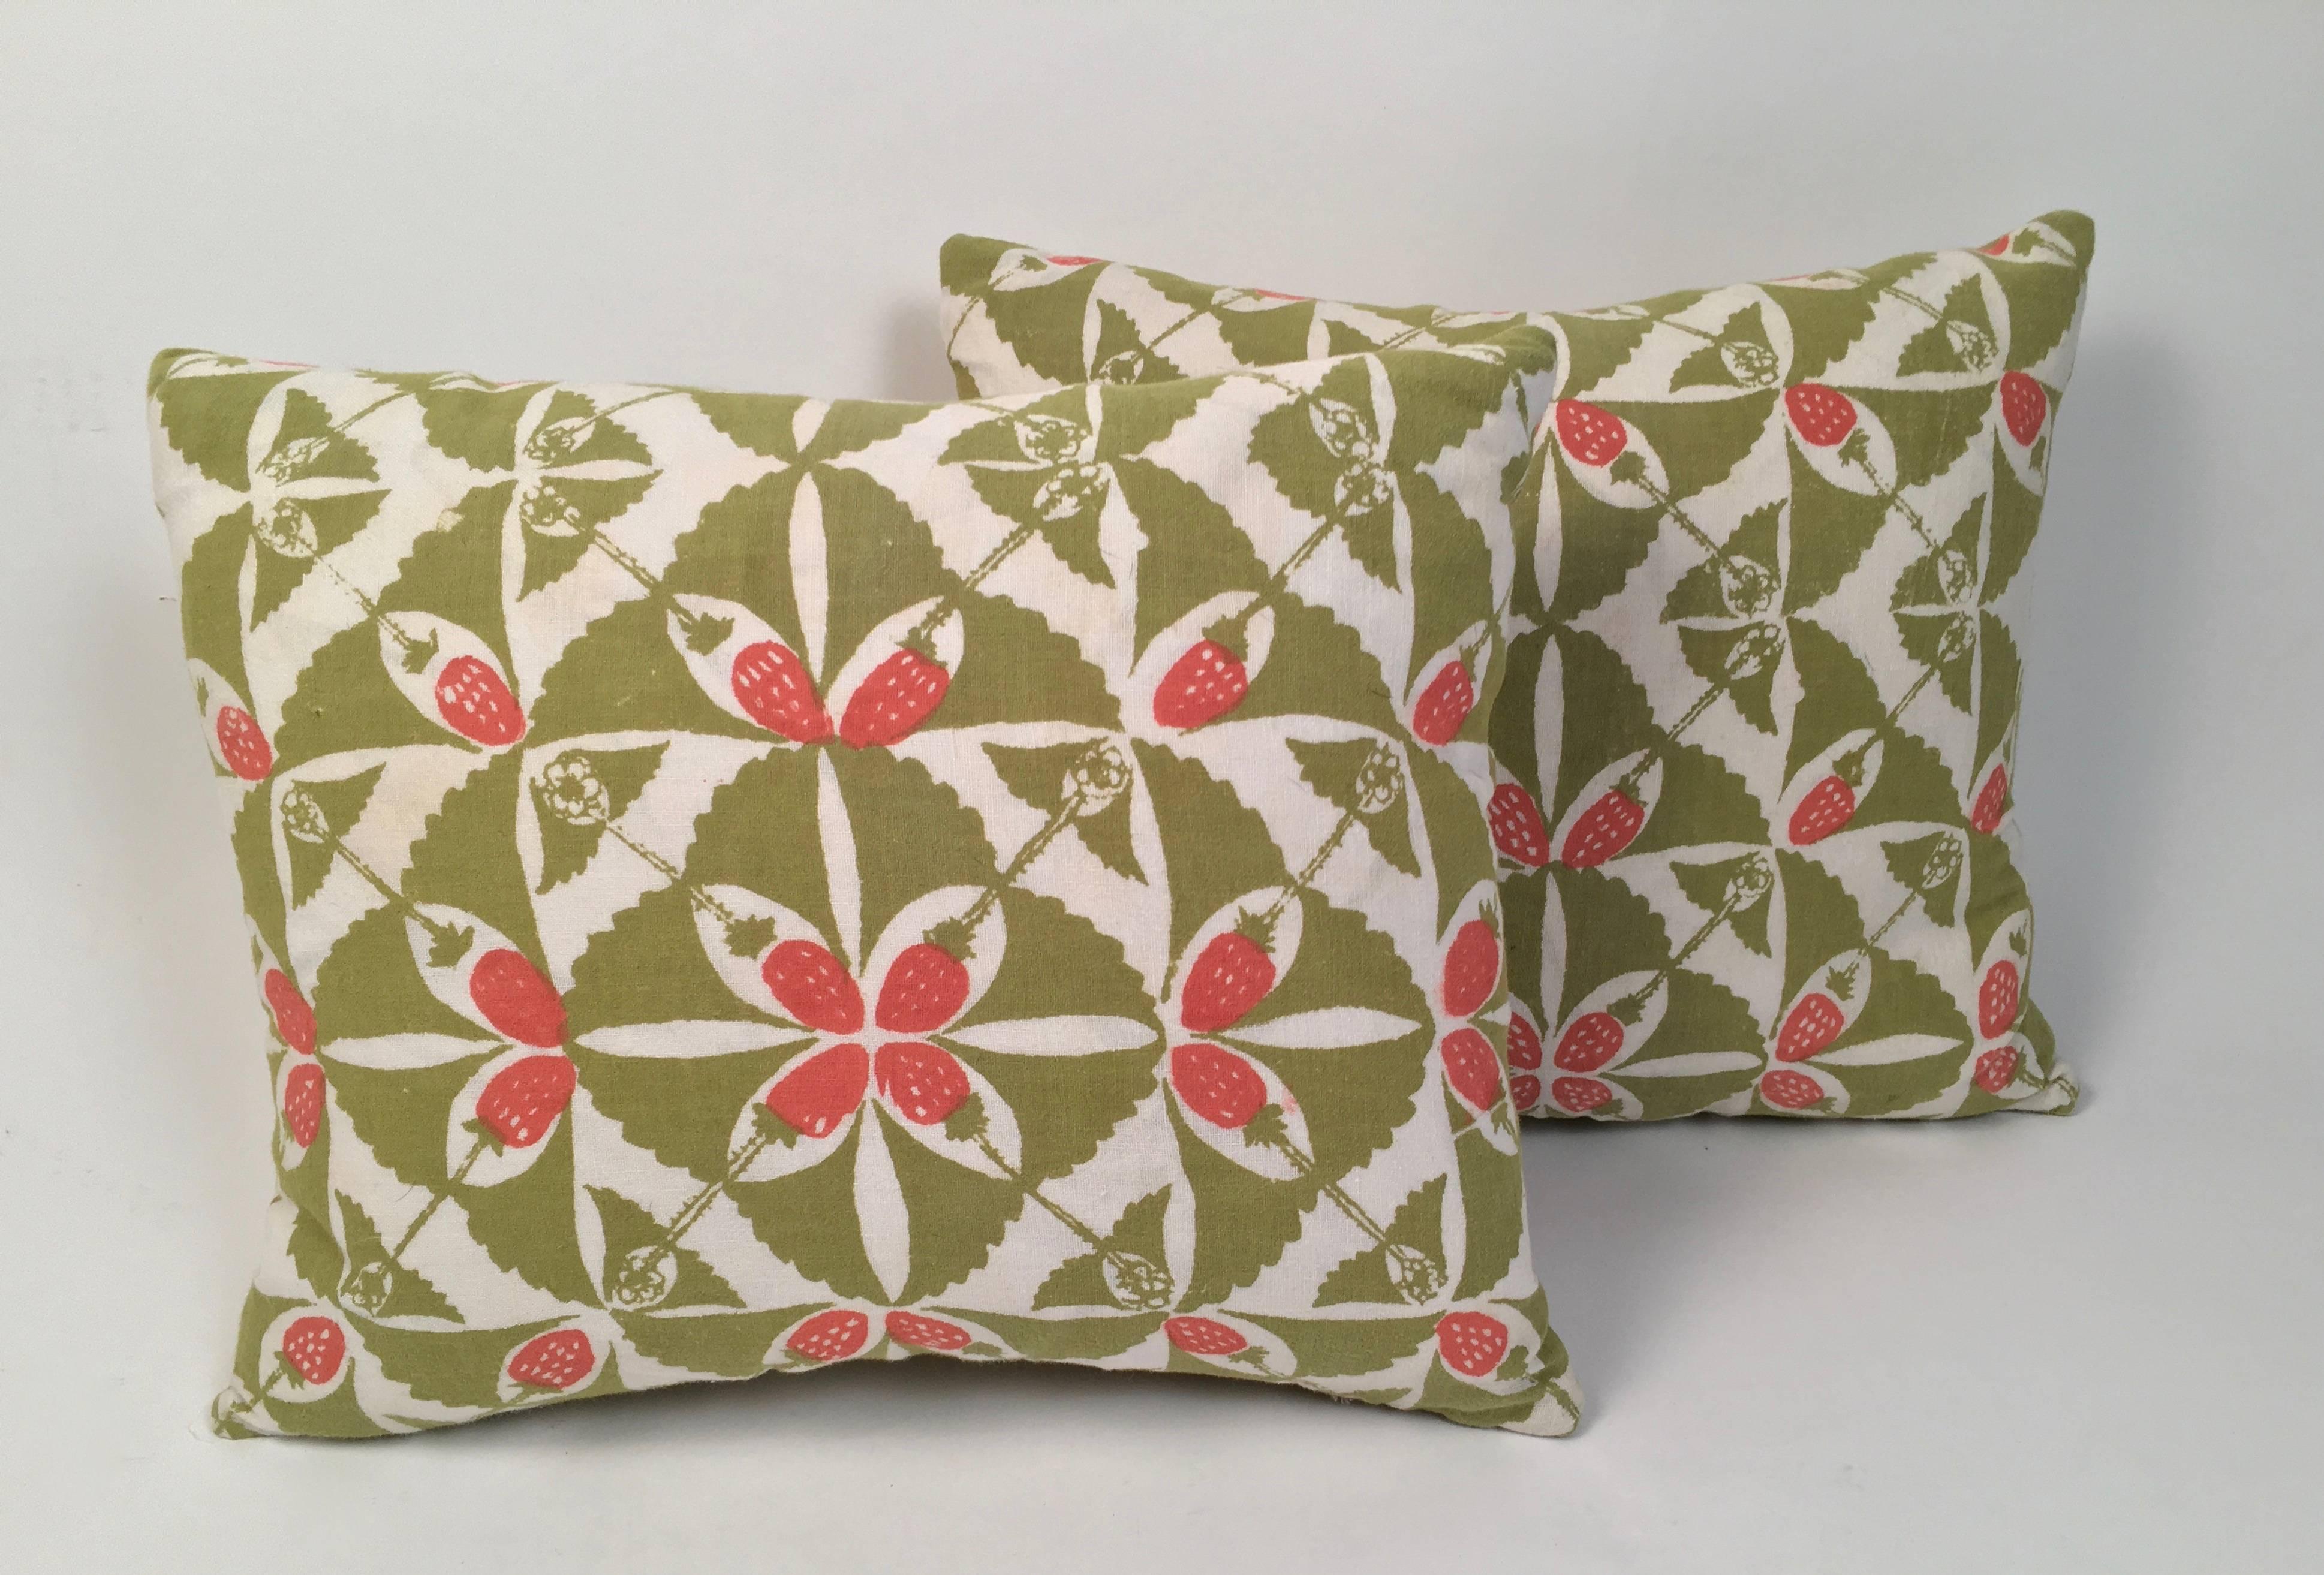 An original vintage hand block printed pillow in the Strawberry Patch pattern, by Peggy Norton, for the Folly Cove Designers, circa 1964, in olive green and pink on cream cotton, hand-sewn, down filled and backed with corresponding green cotton